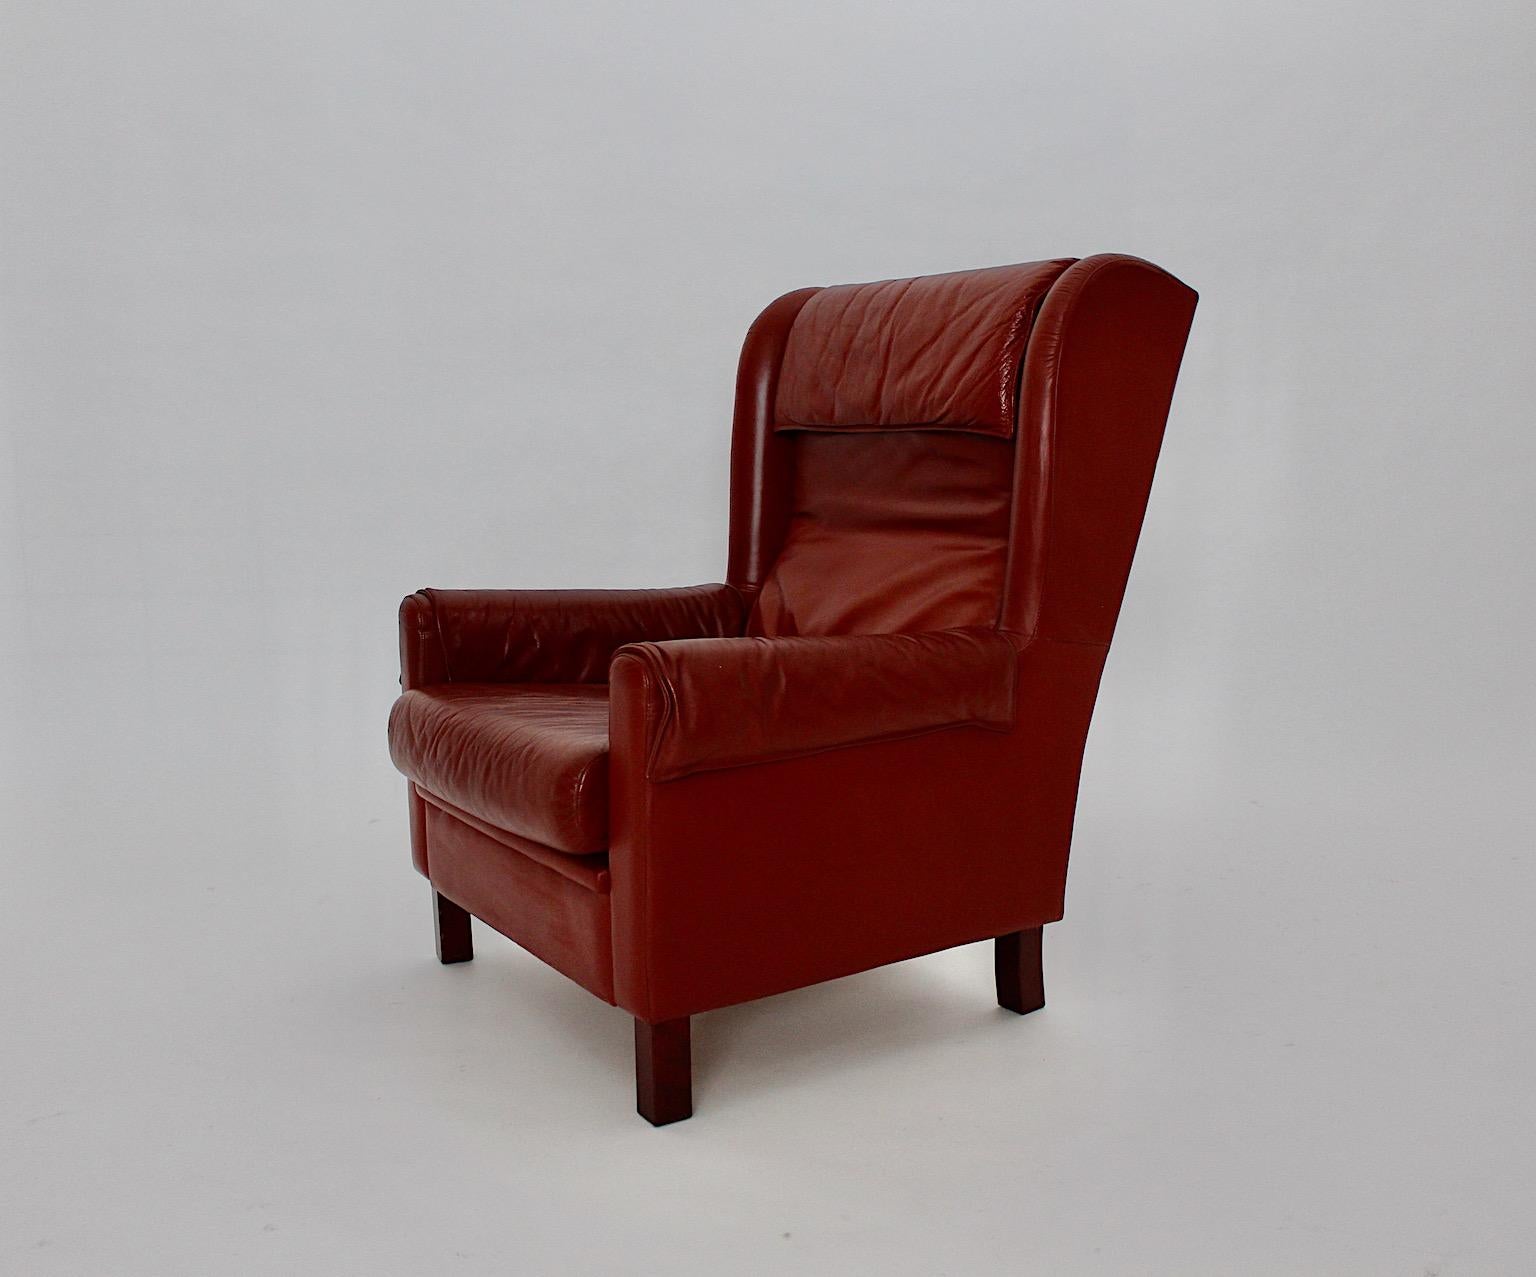 Leather Reddish Brown Vintage Wingback Chair Lounge Chair 1970s Austria For Sale 1